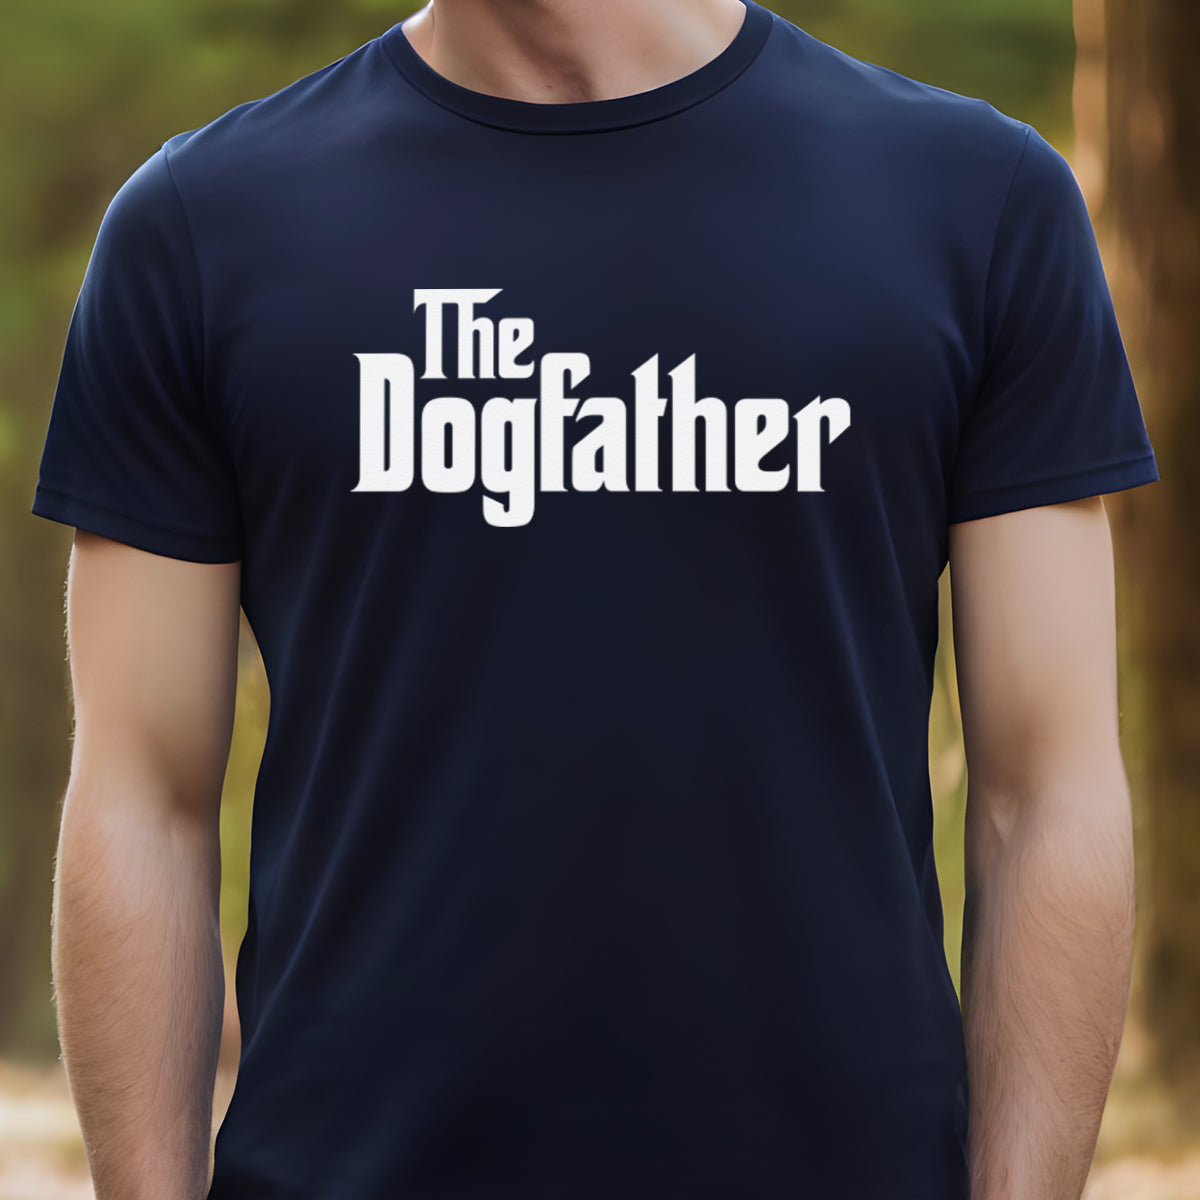 The Dogfather - Mens T-Shirt - Dads T-Shirt